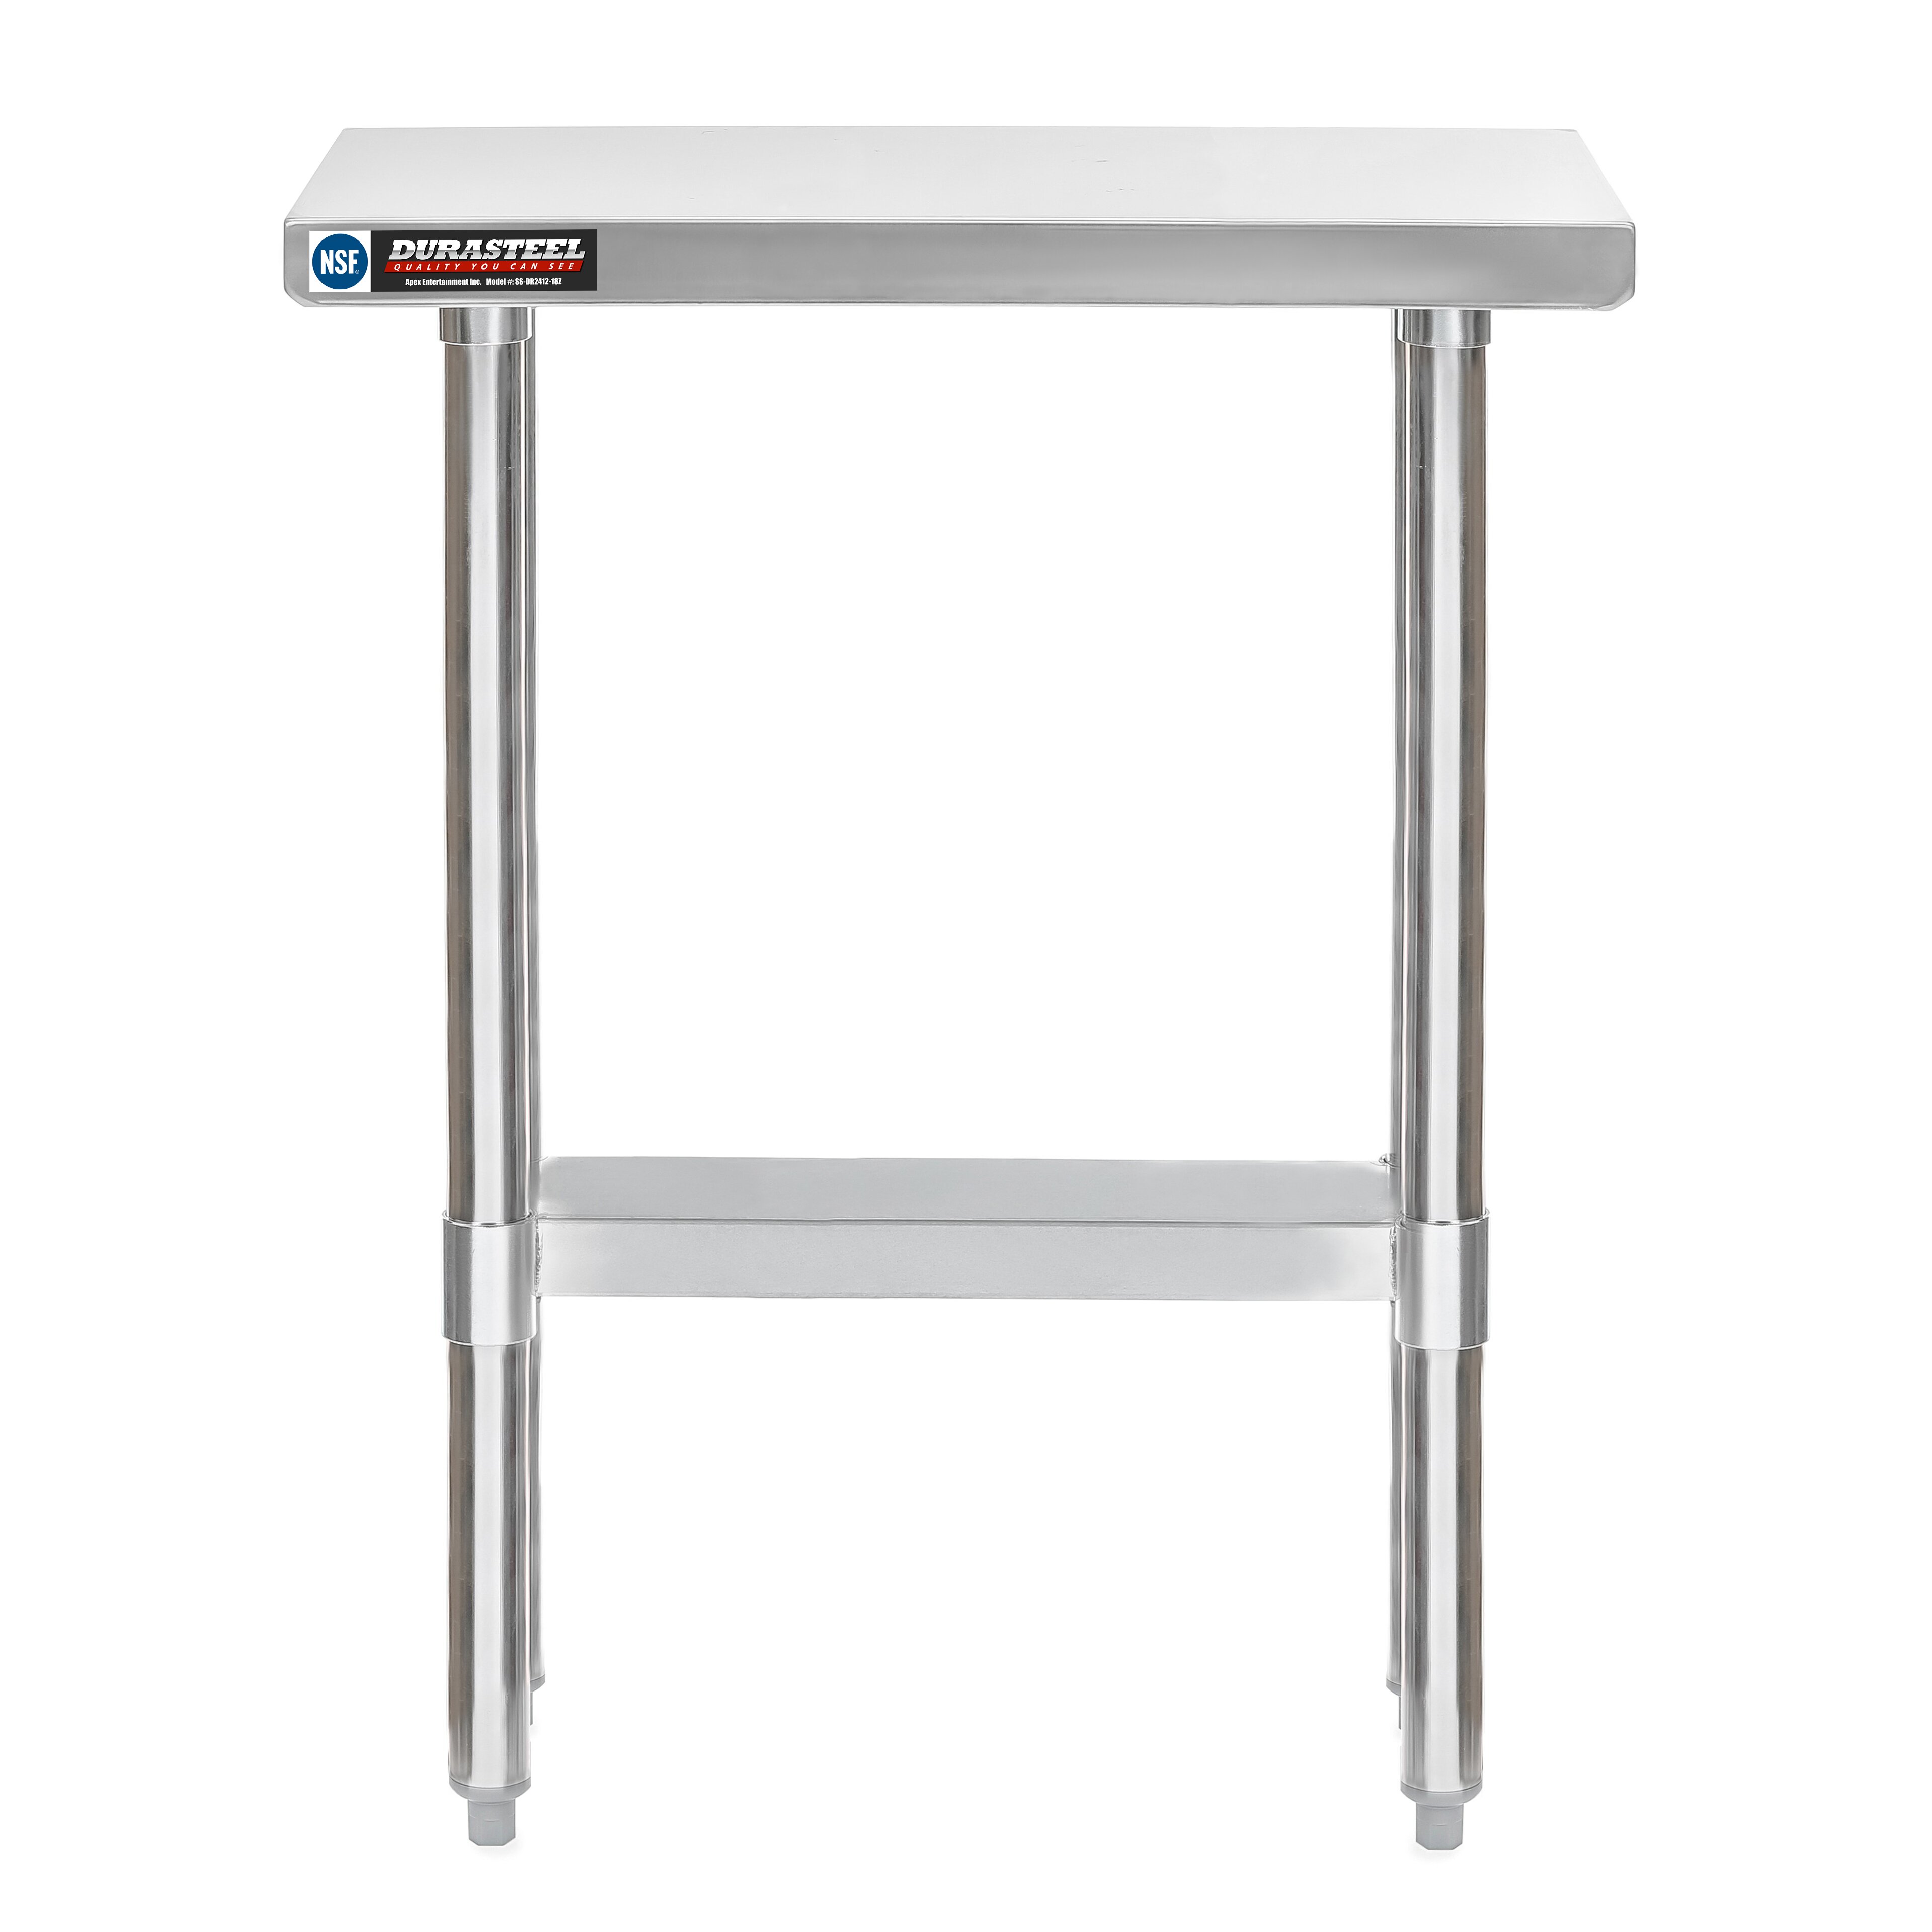 New Commercial 48" X 30" Stainless Steel Work Table with Undershelf  Galvan NSF 